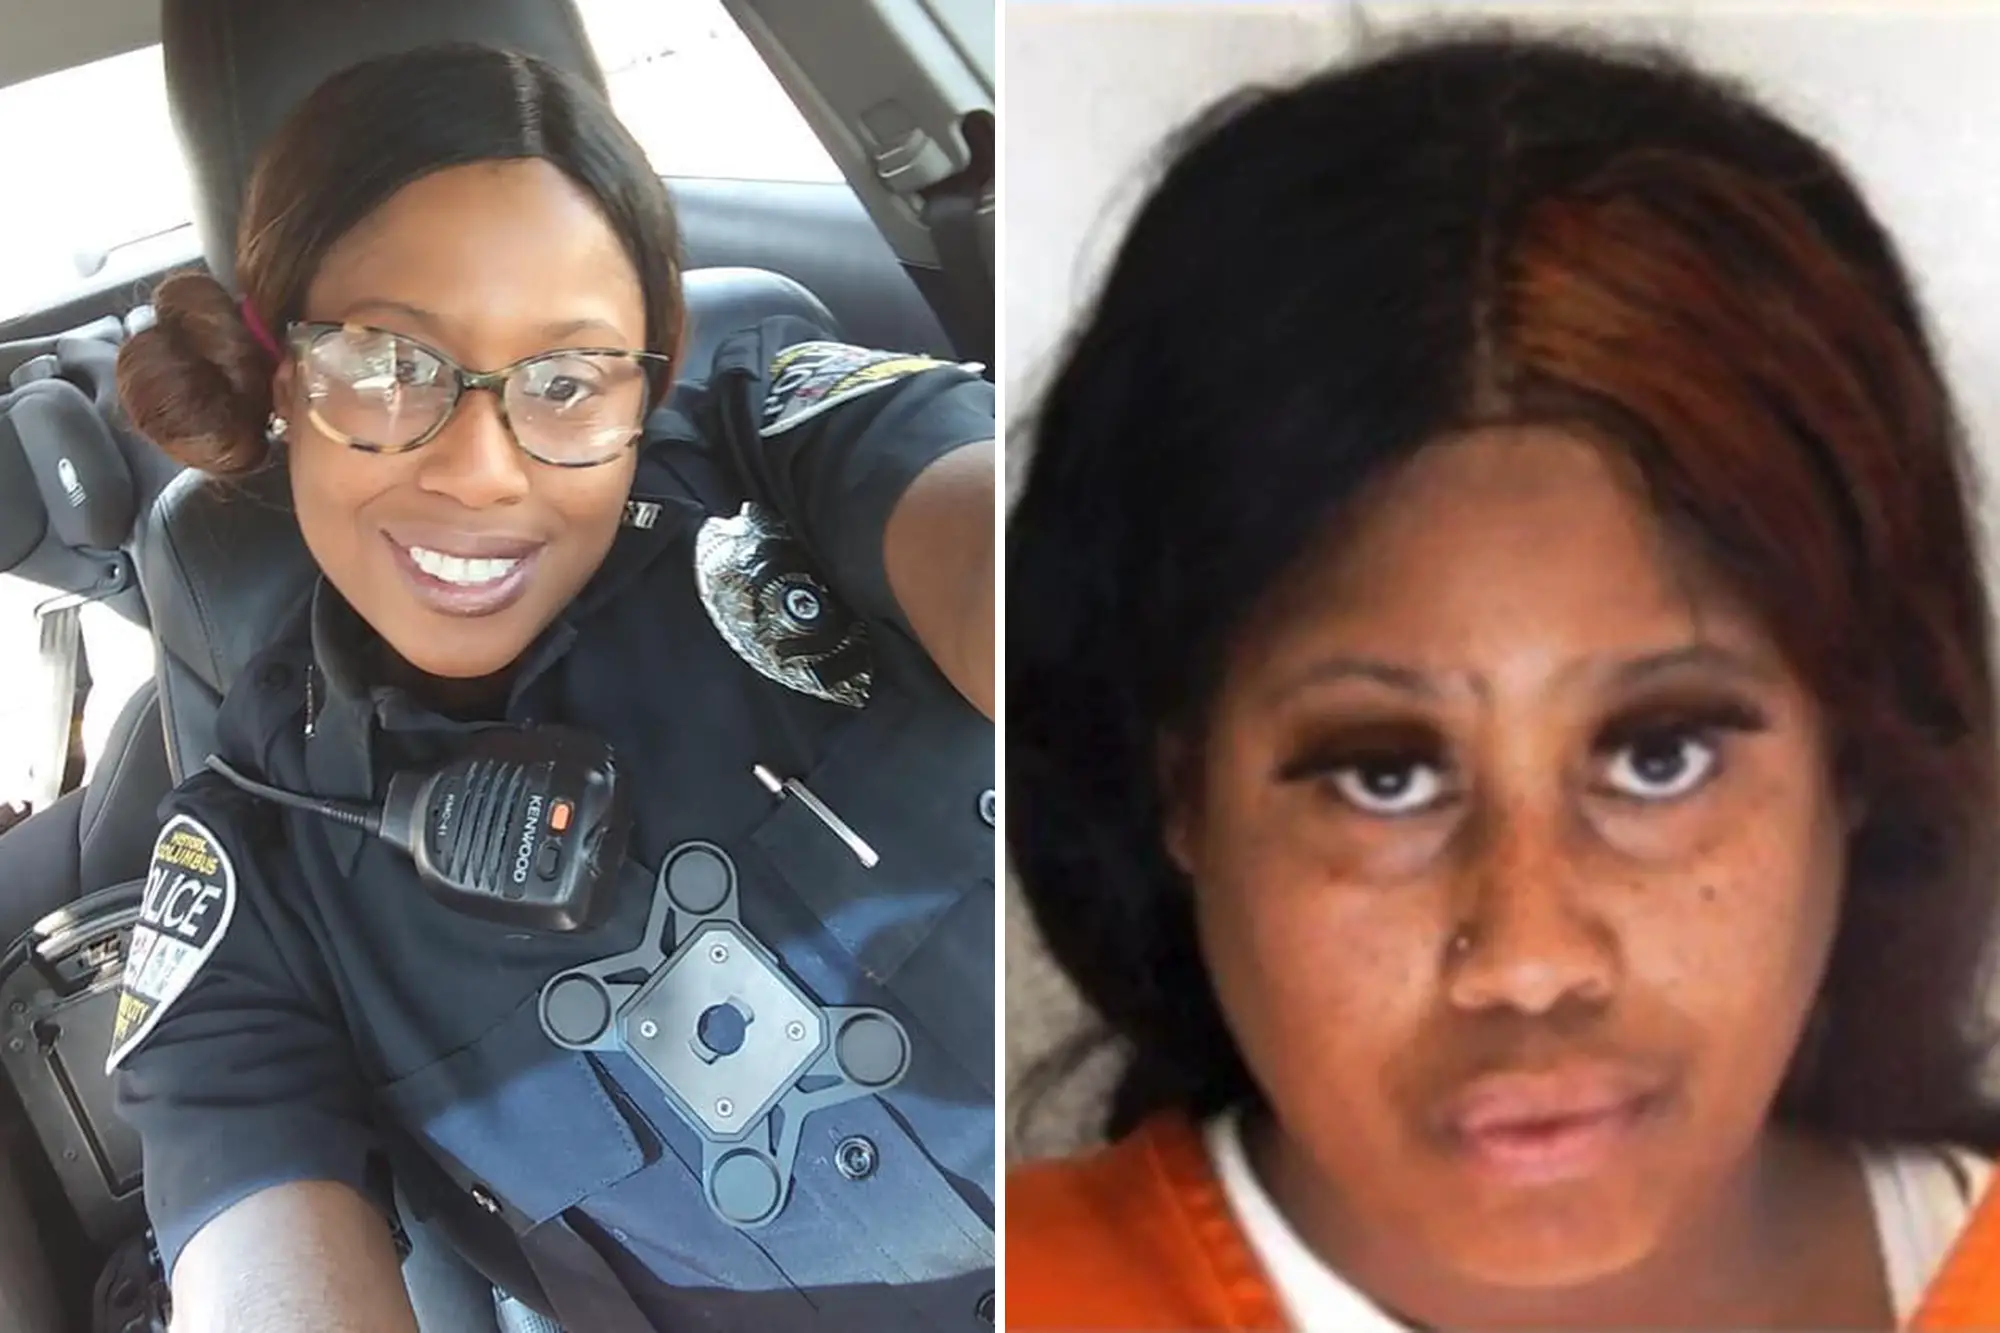 On-duty cop arrested for shoplifting while in uniform: ‘It’s embarrassing for the department’